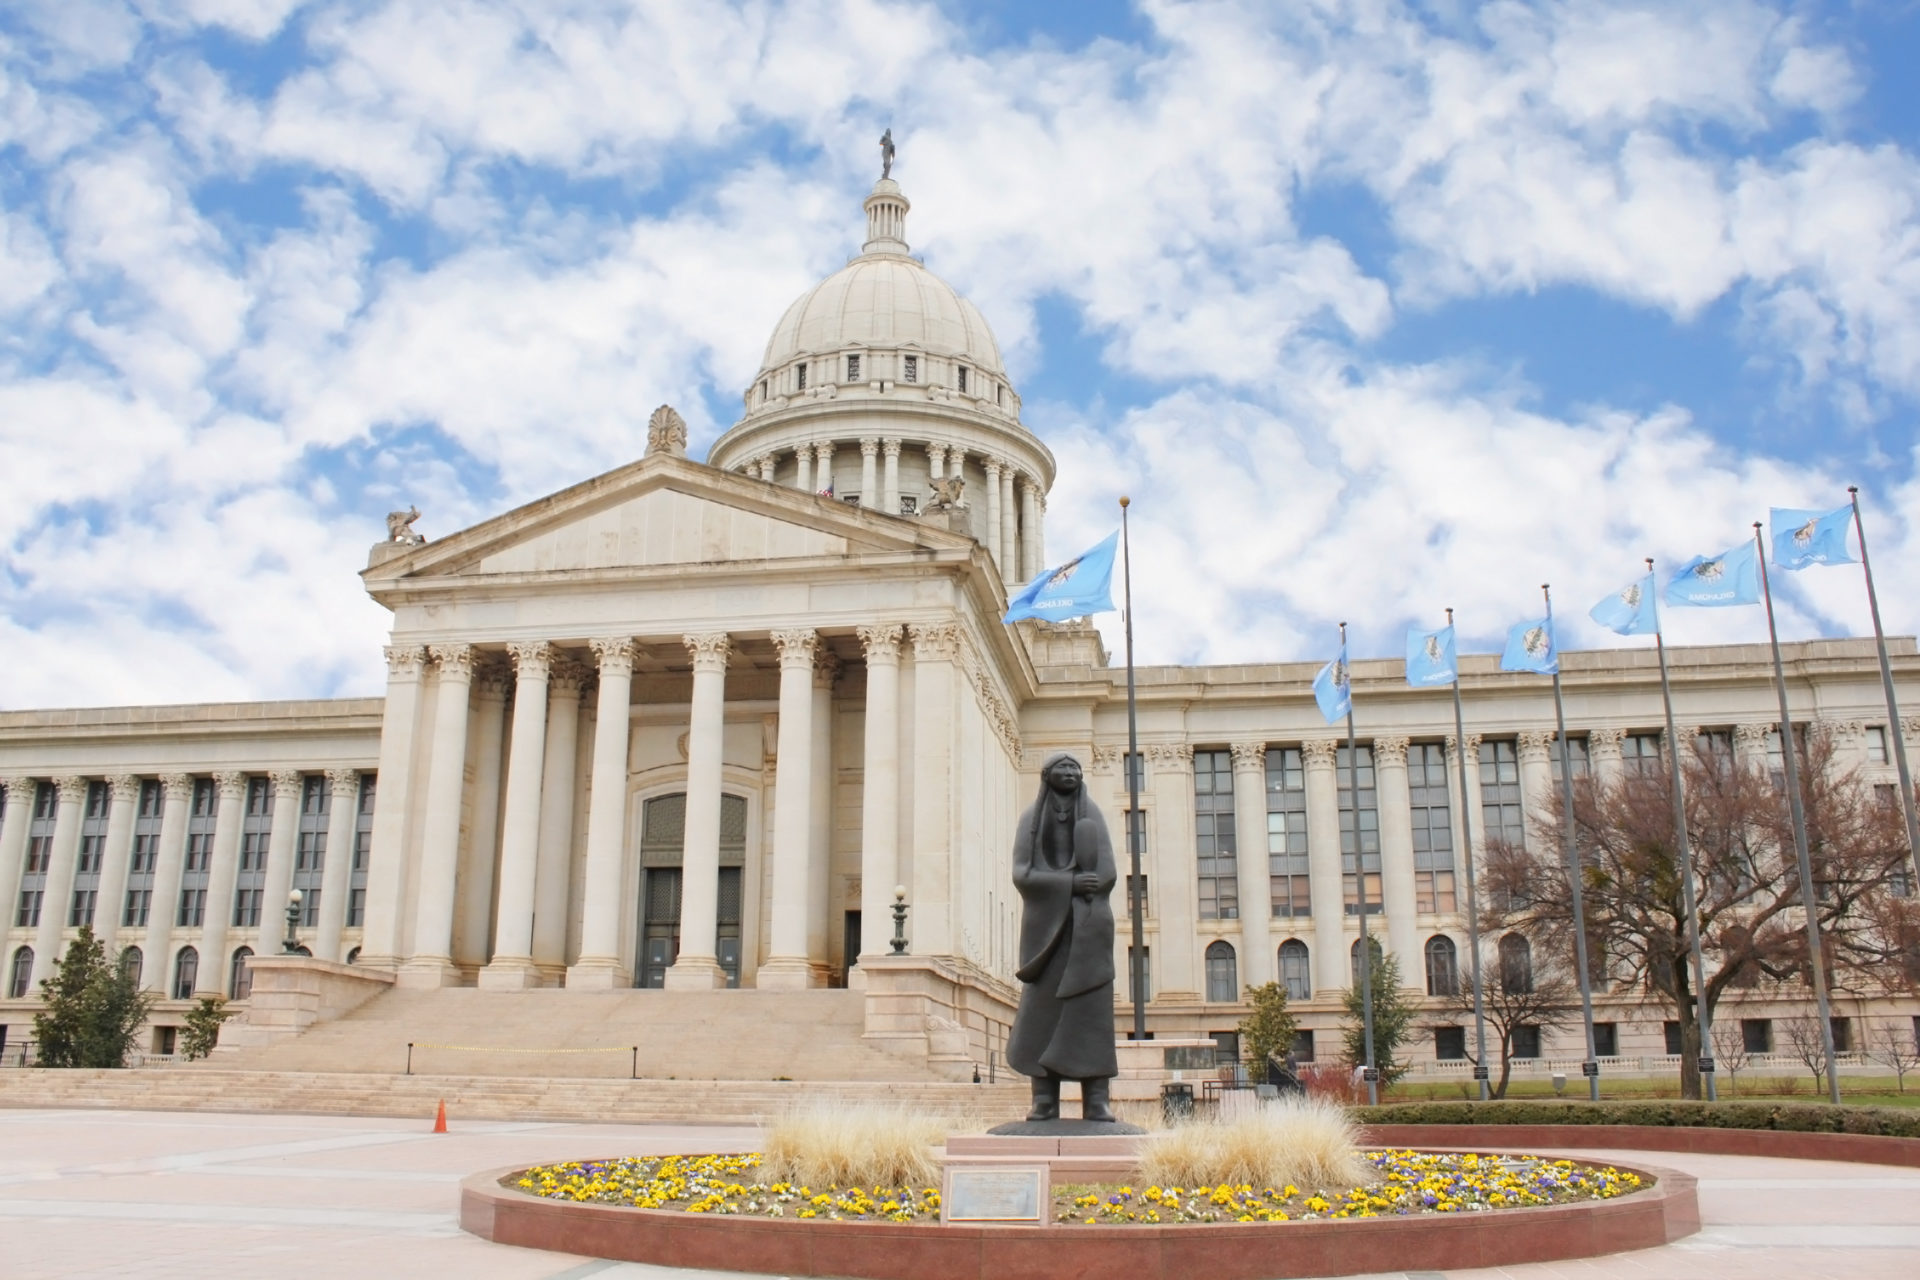 Extra Security Planned After Threats Made Towards Muslim Day at the Capitol